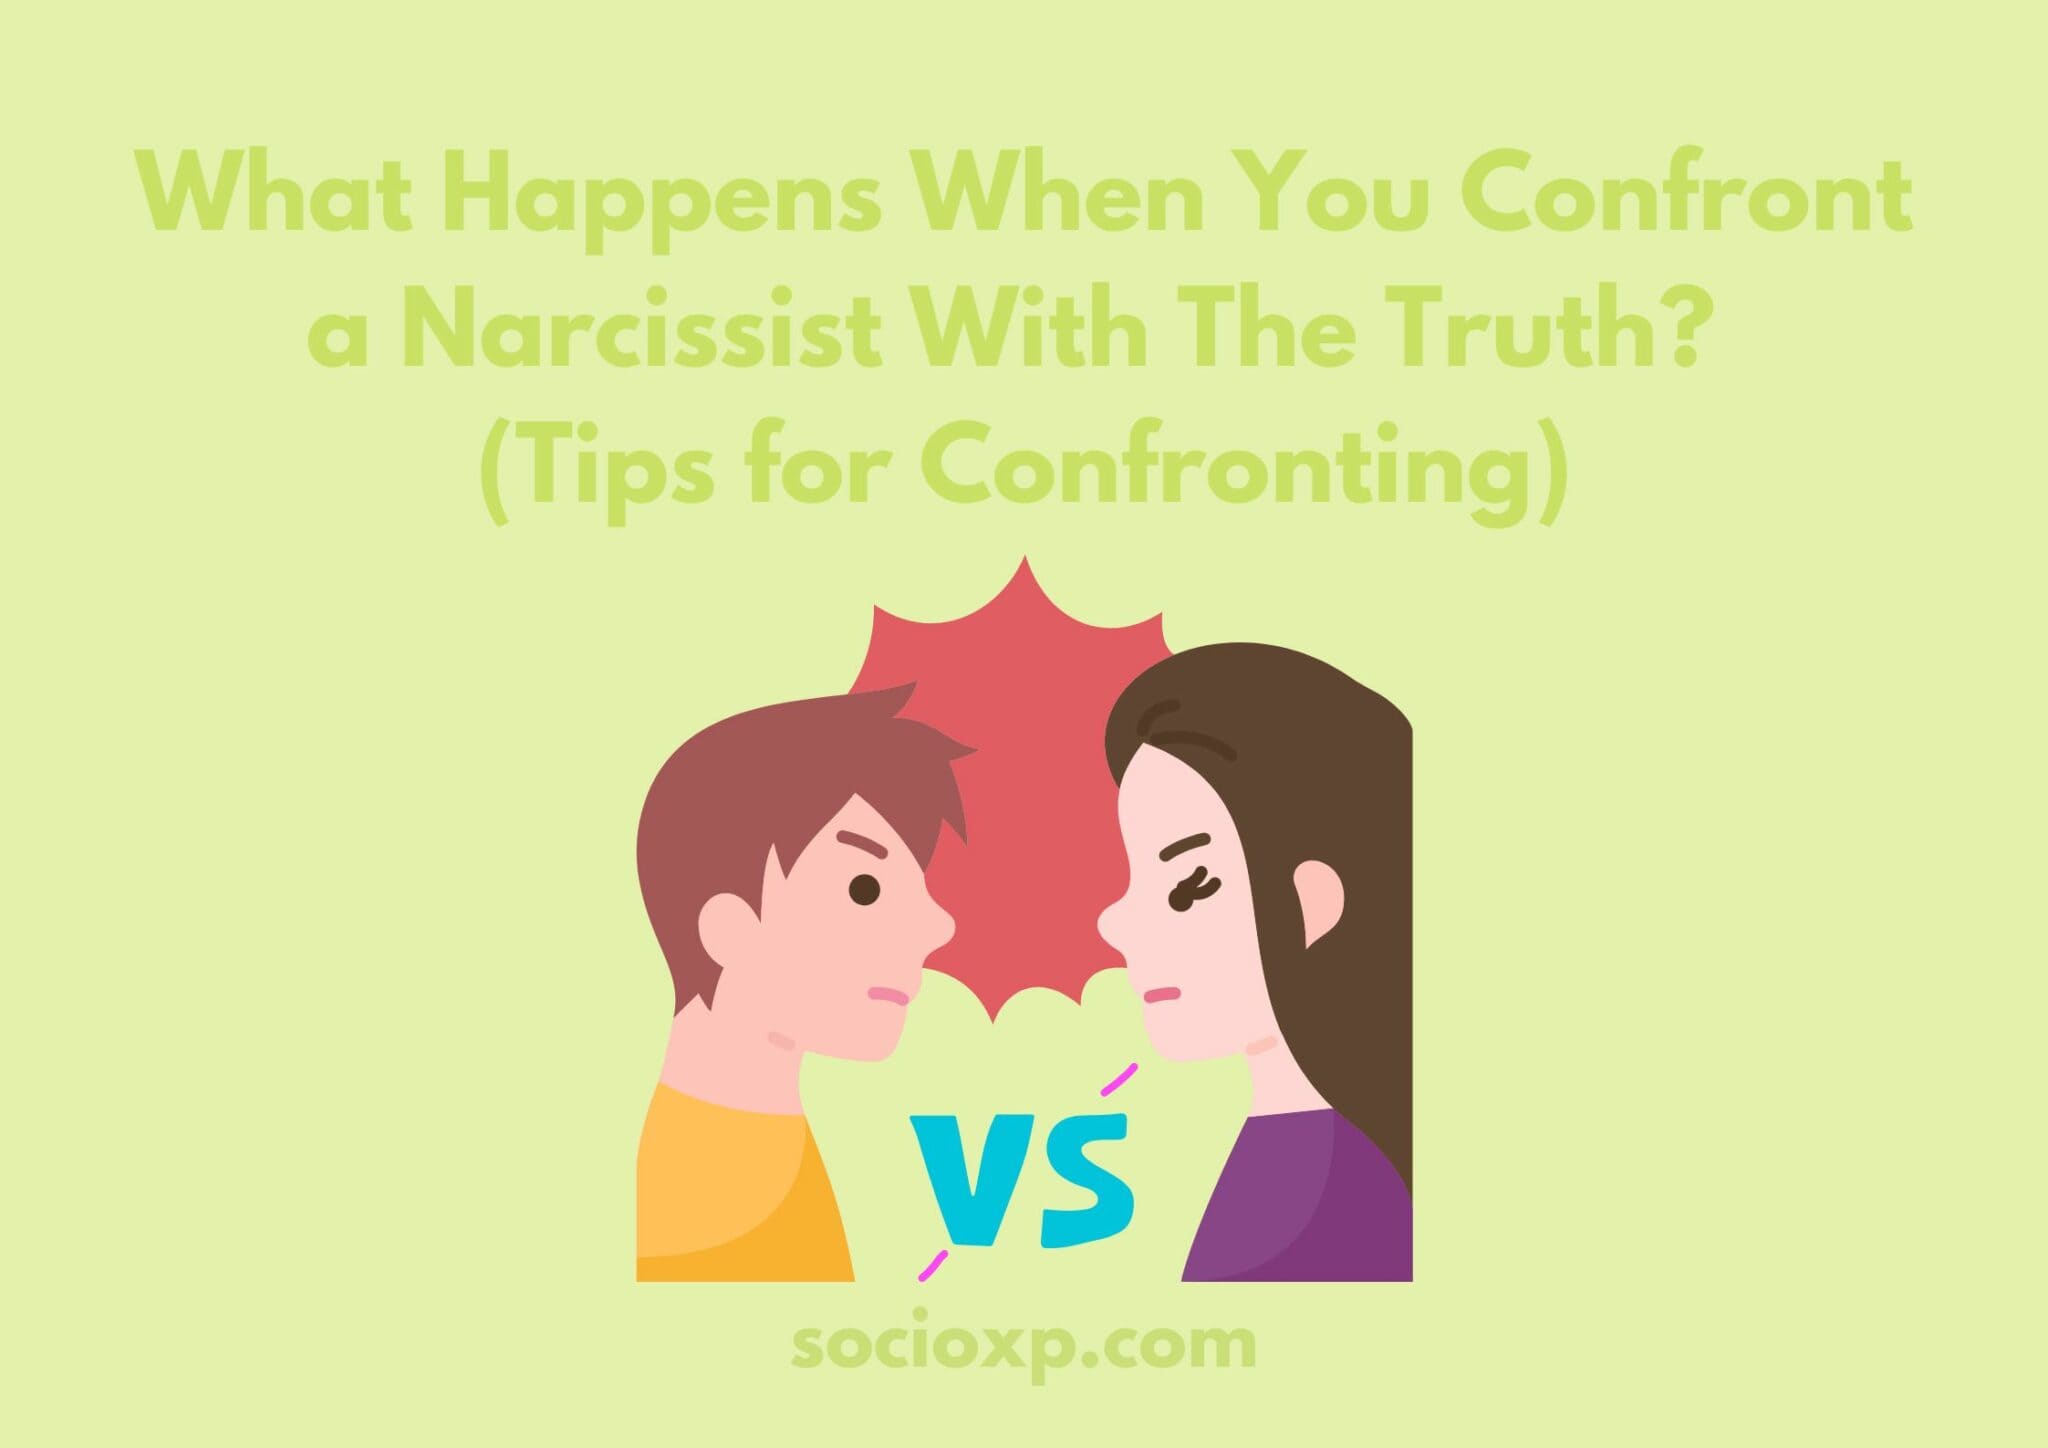 What Happens When You Confront a Narcissist With The Truth? (Tips for Confronting)